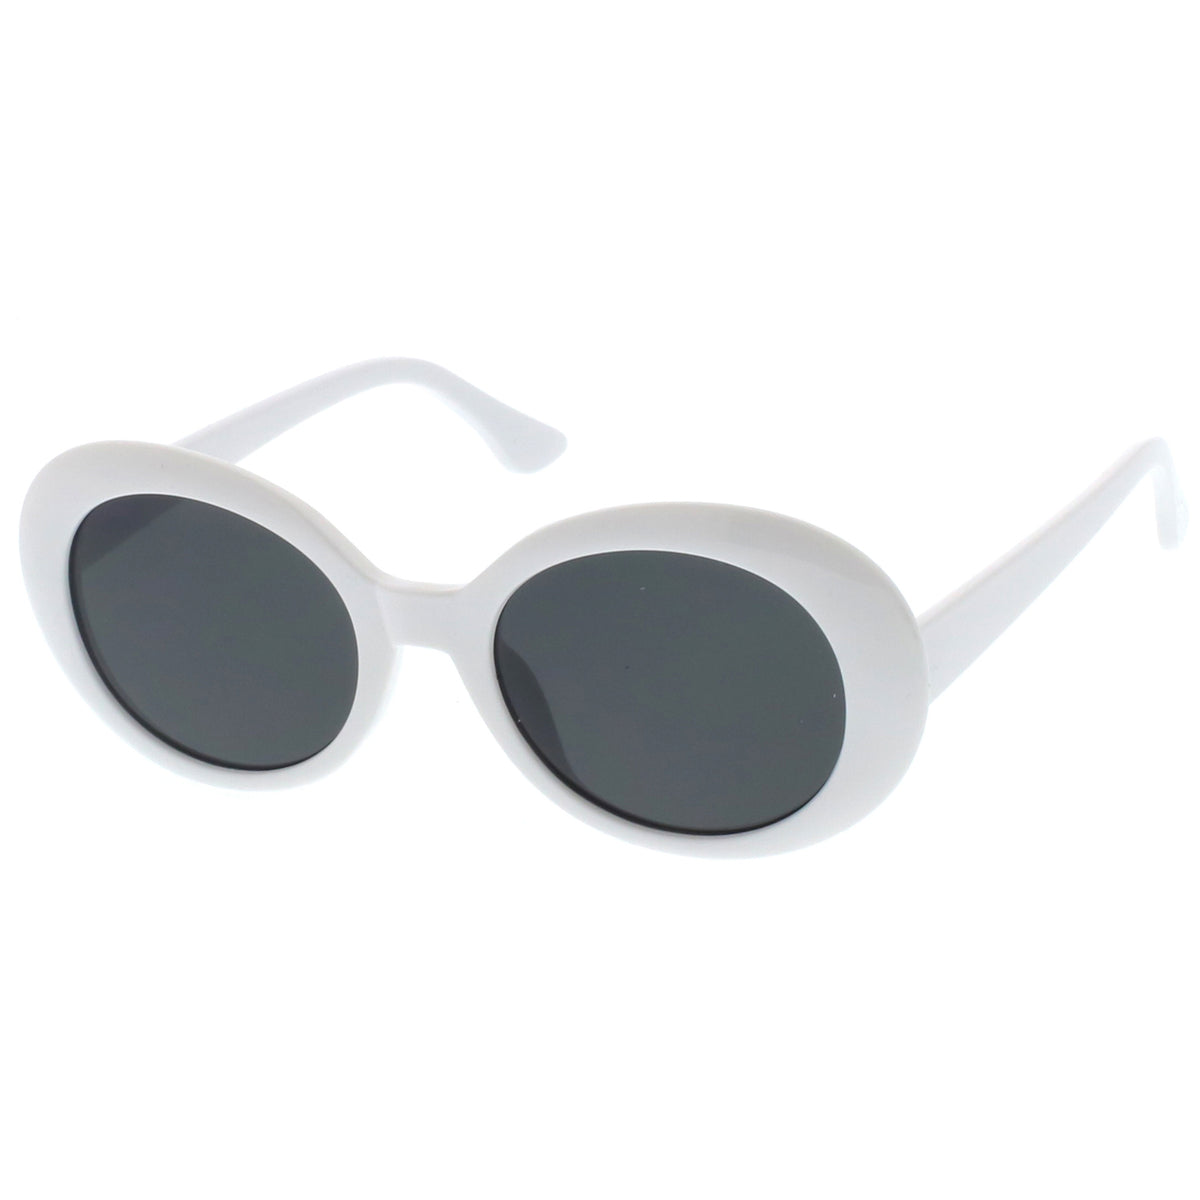 Retro Oval Sunglasses Tapered Arms Neutral Colored Round Lens 53mm Sunglass La